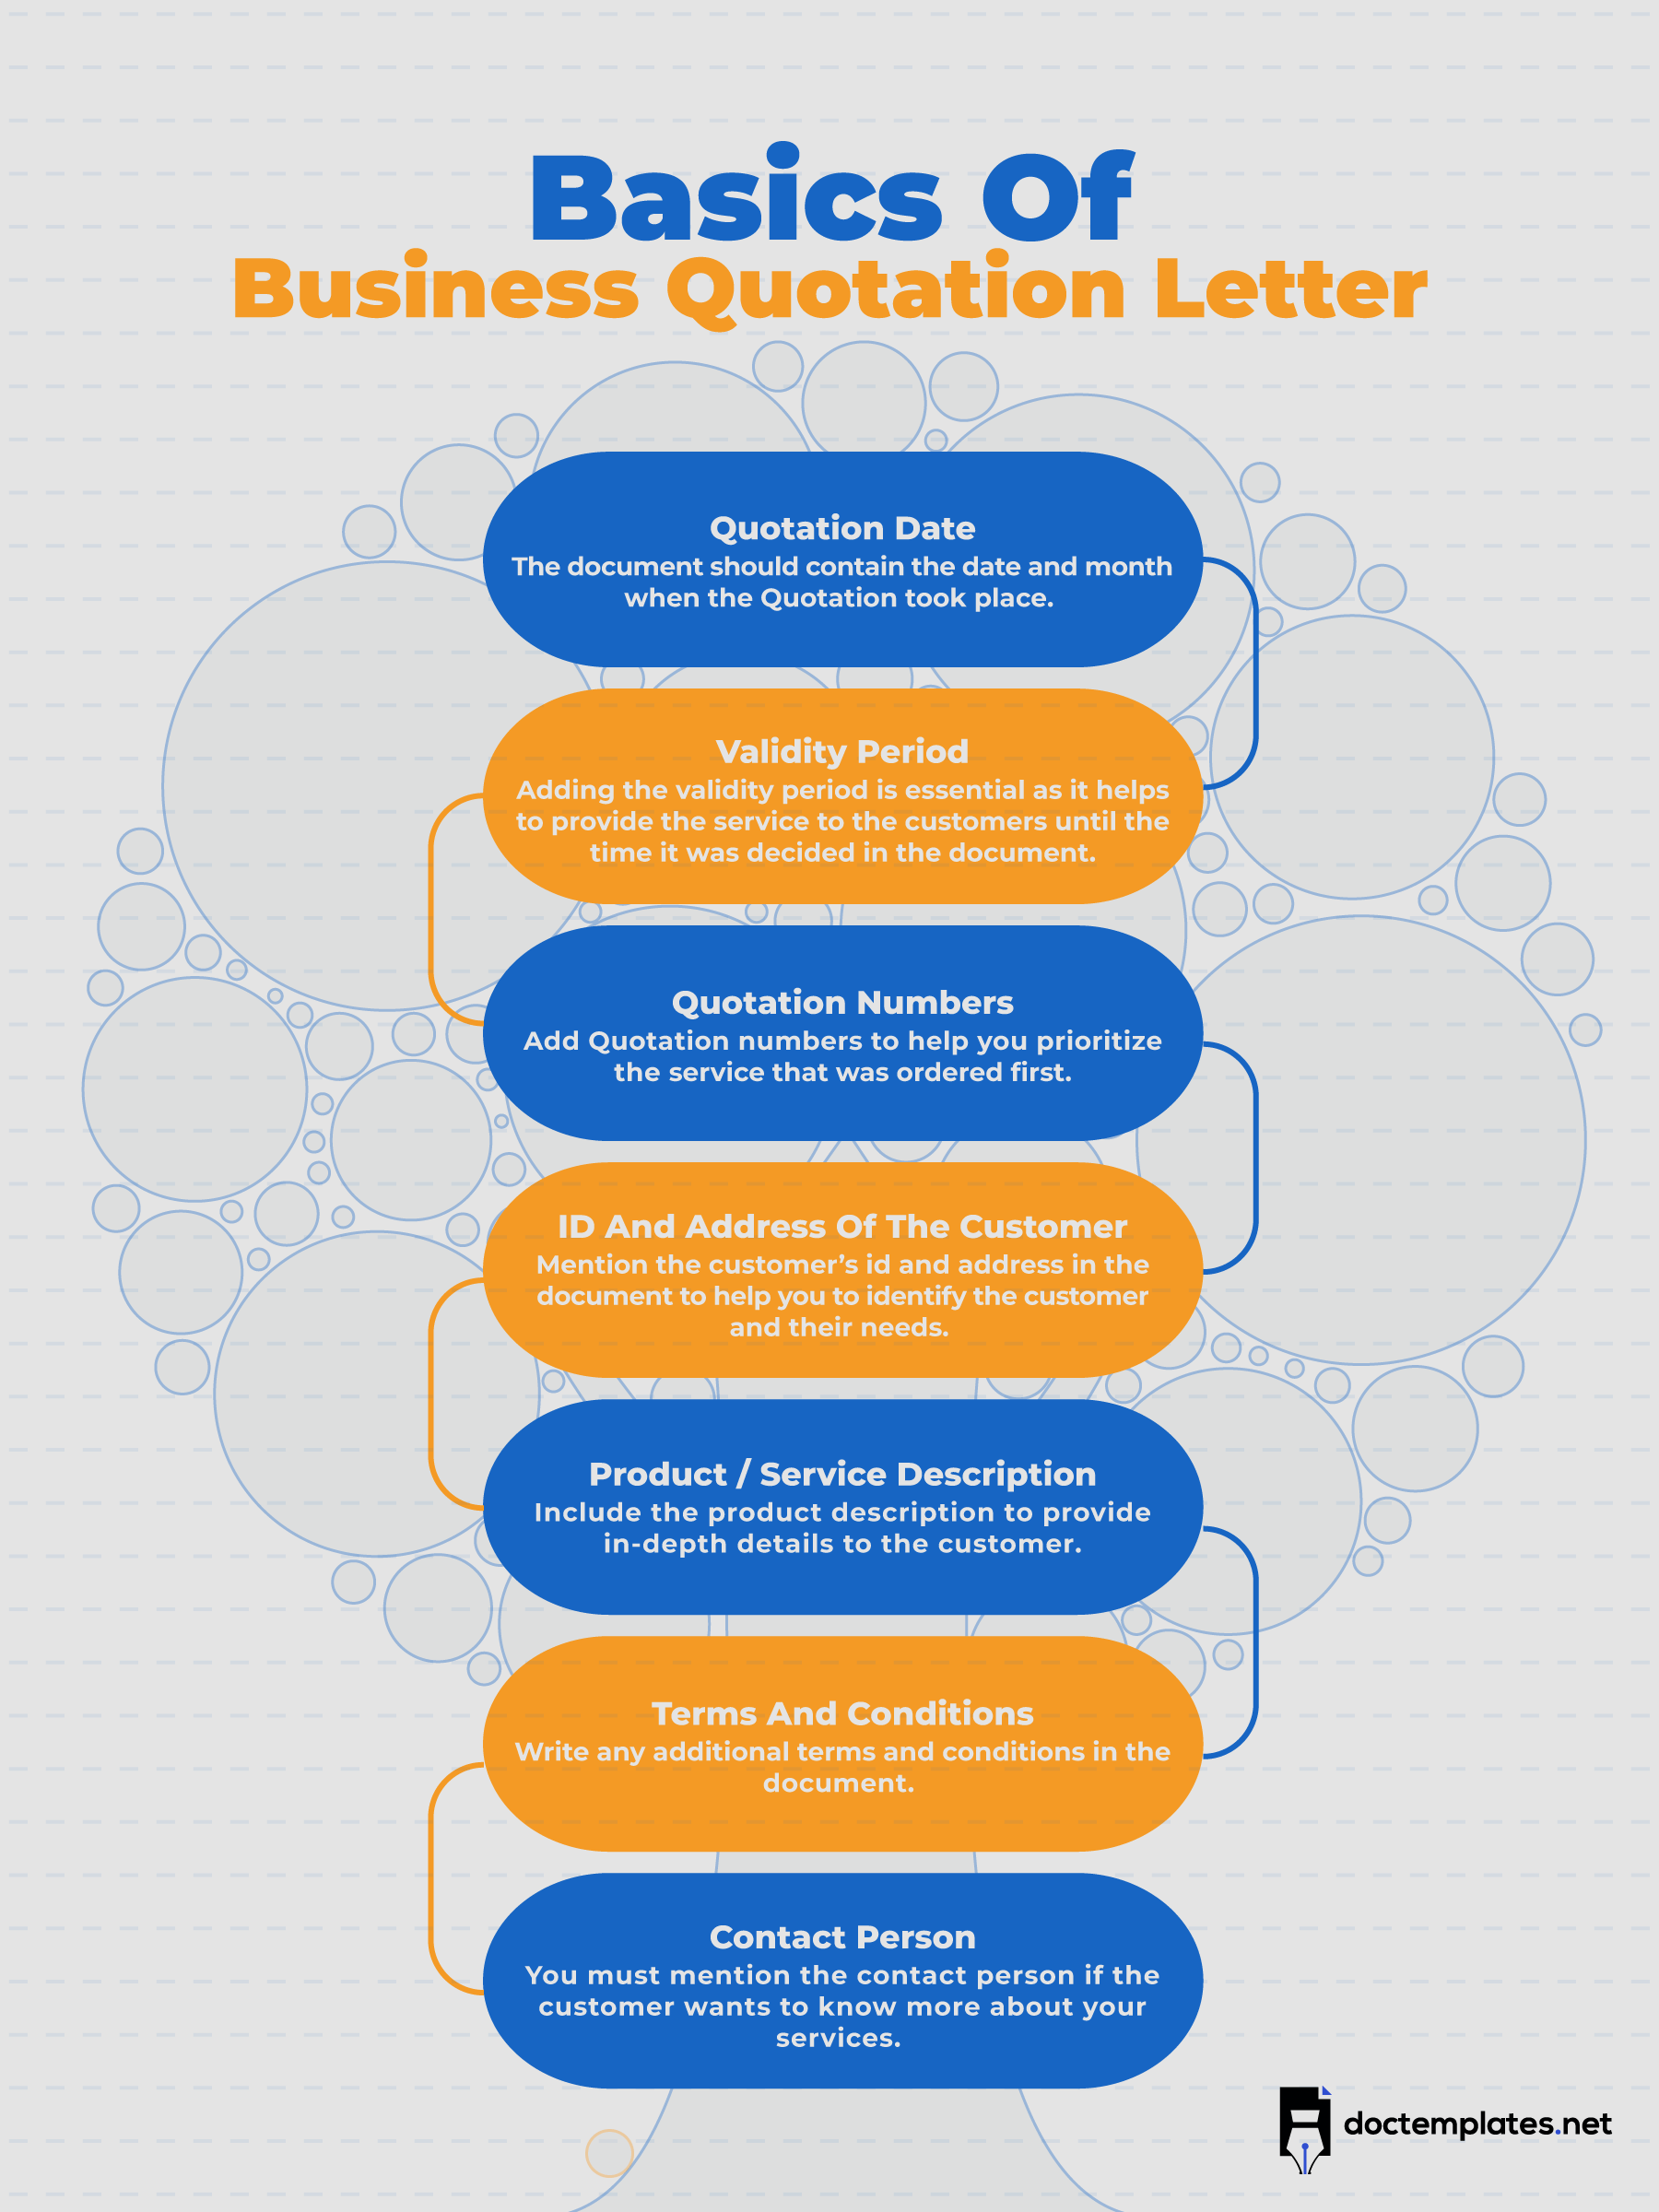 This infographic show basics of business quotation letter.